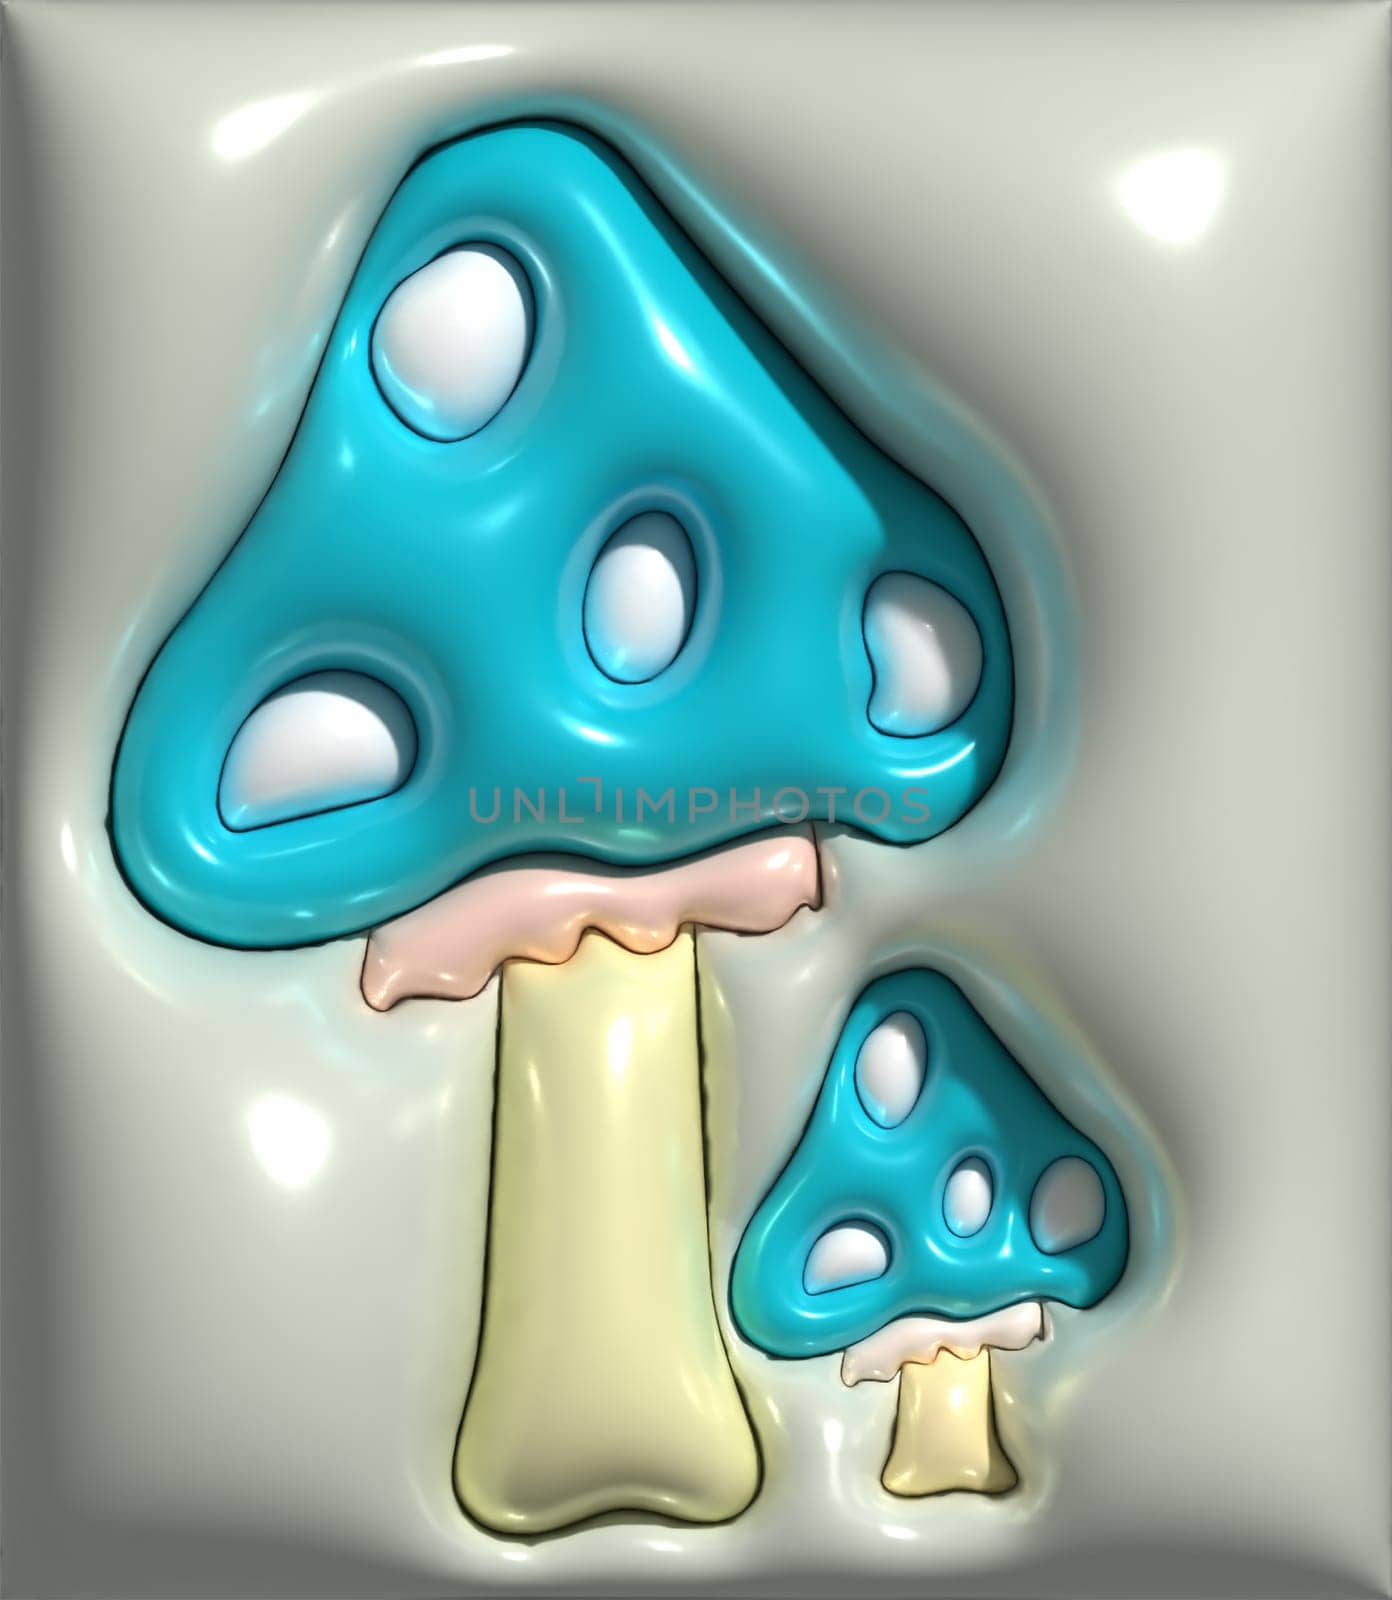 Blue mushroom with white dots, 3D rendering illustration by ndanko